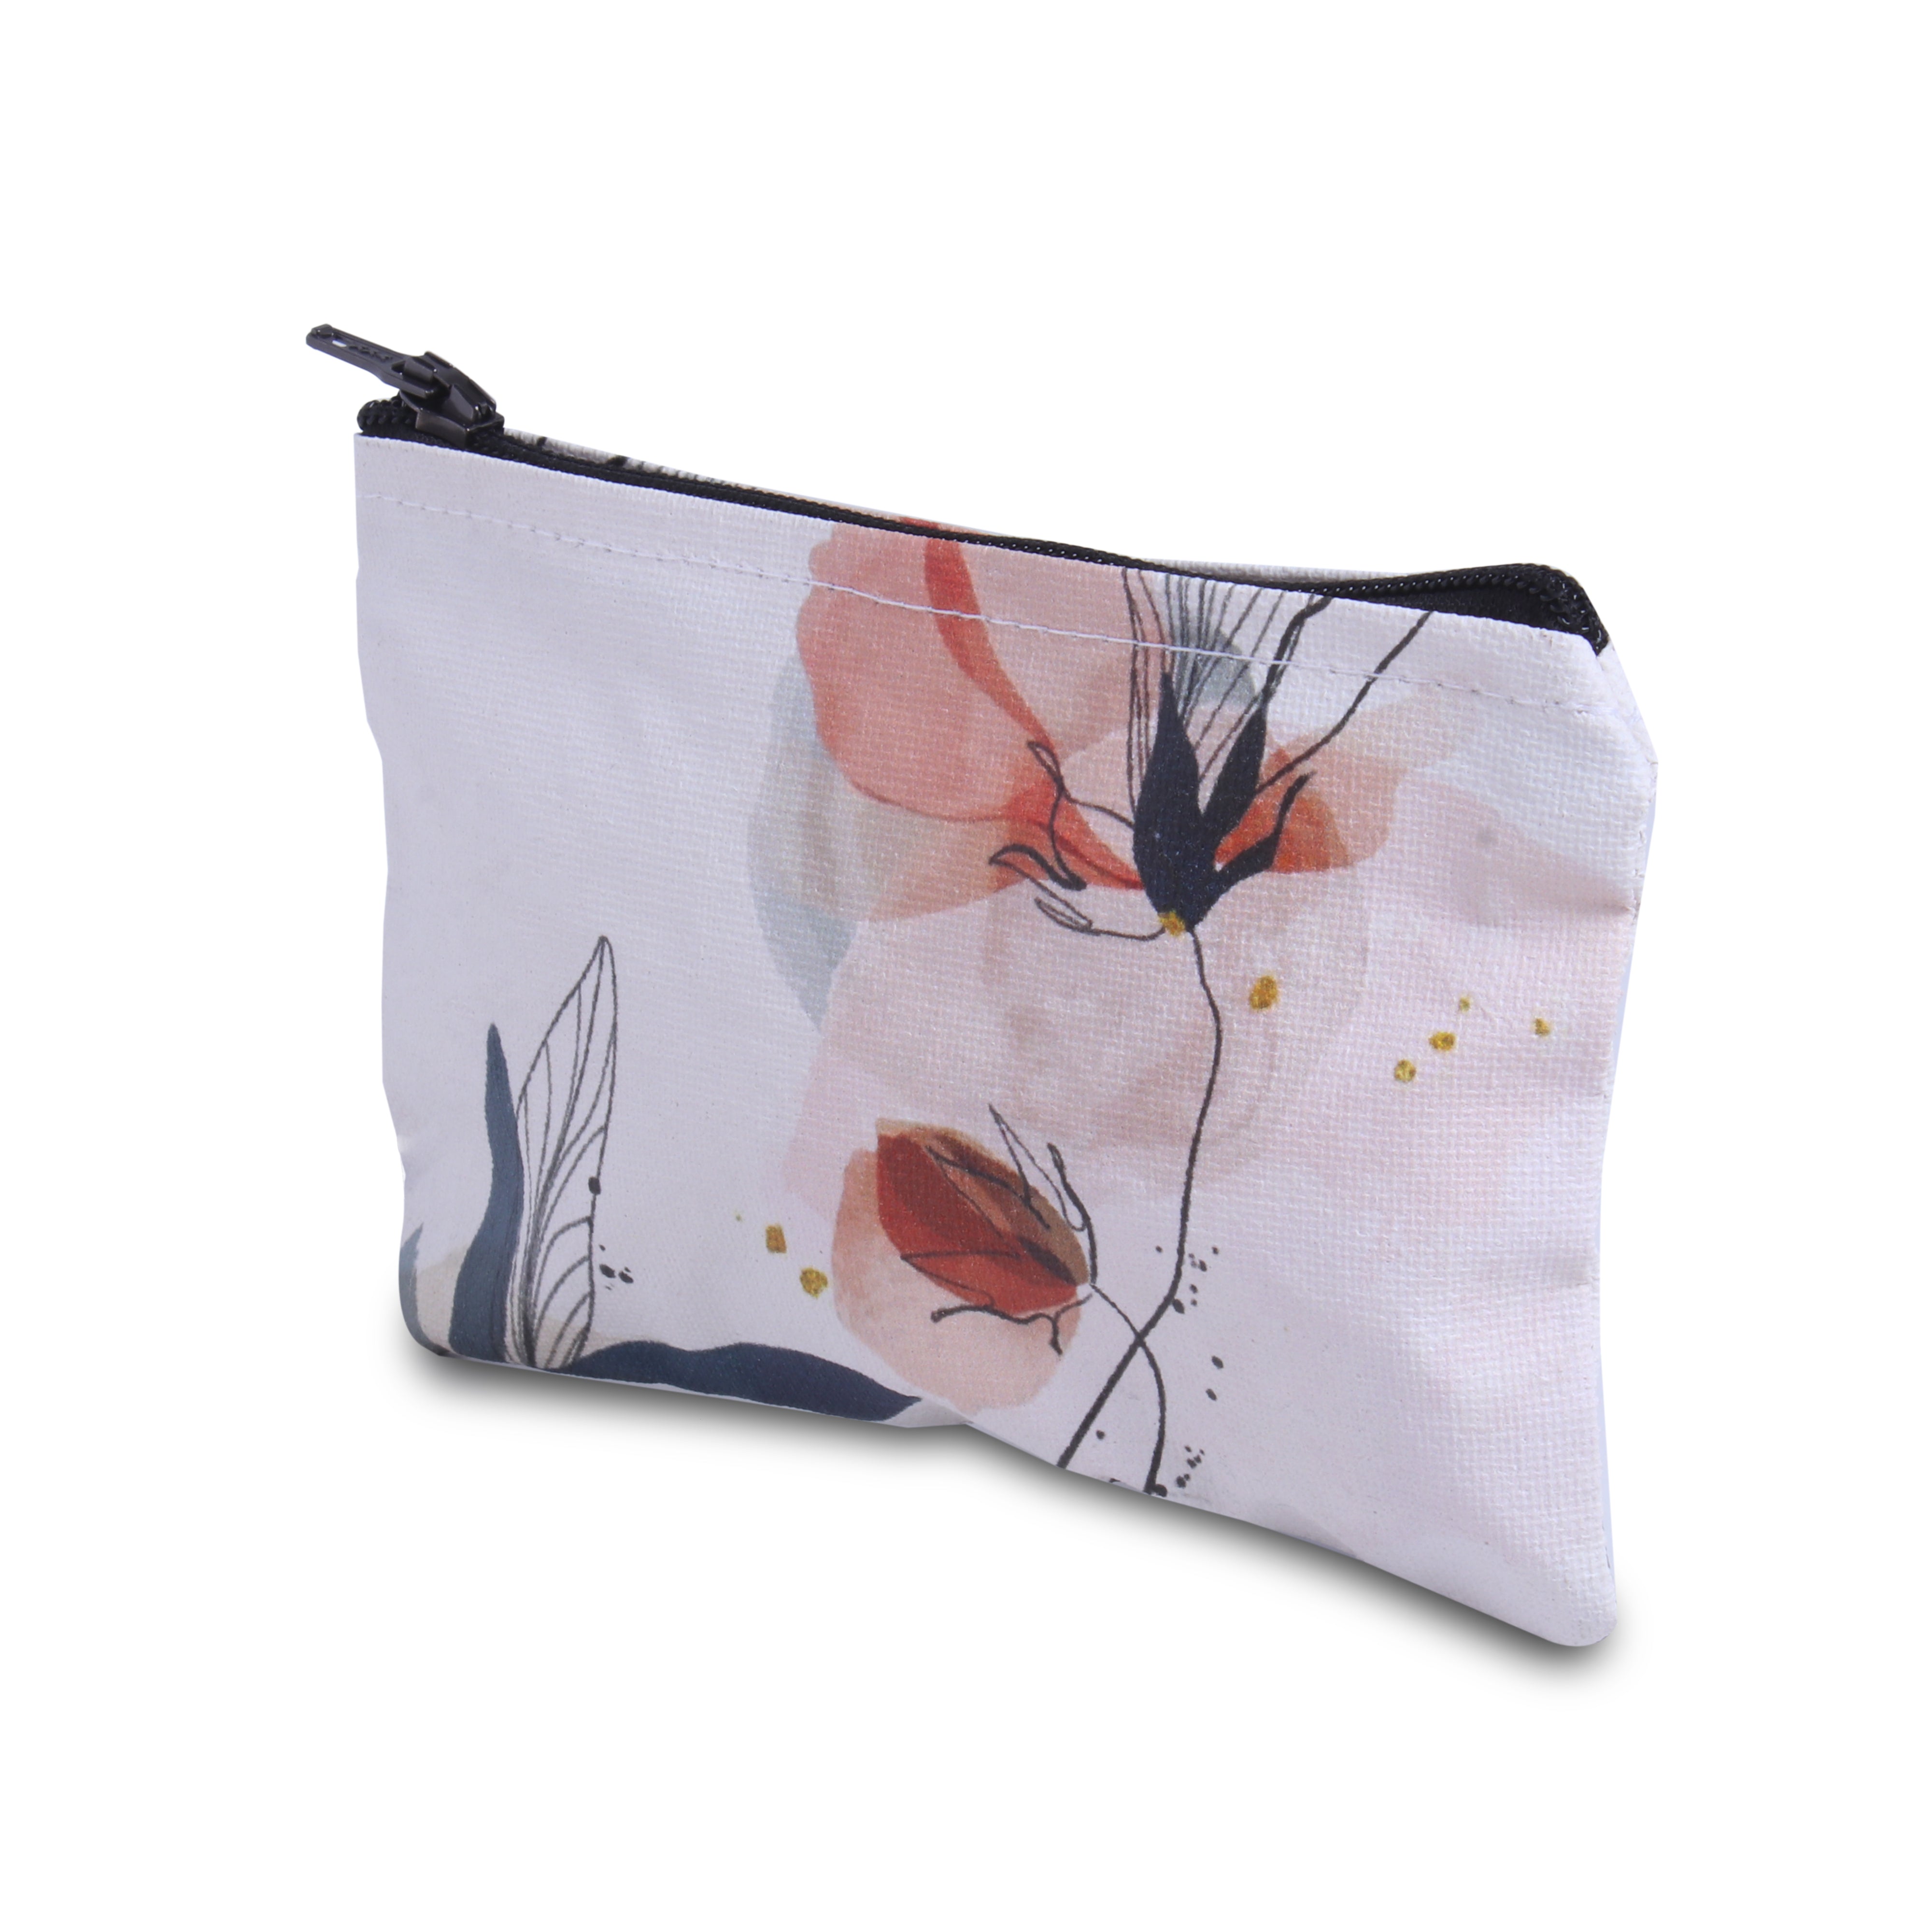 Canvas Printed Zip Pouch Floral Elegance 10.75 X 7.5inch Approx1 pc